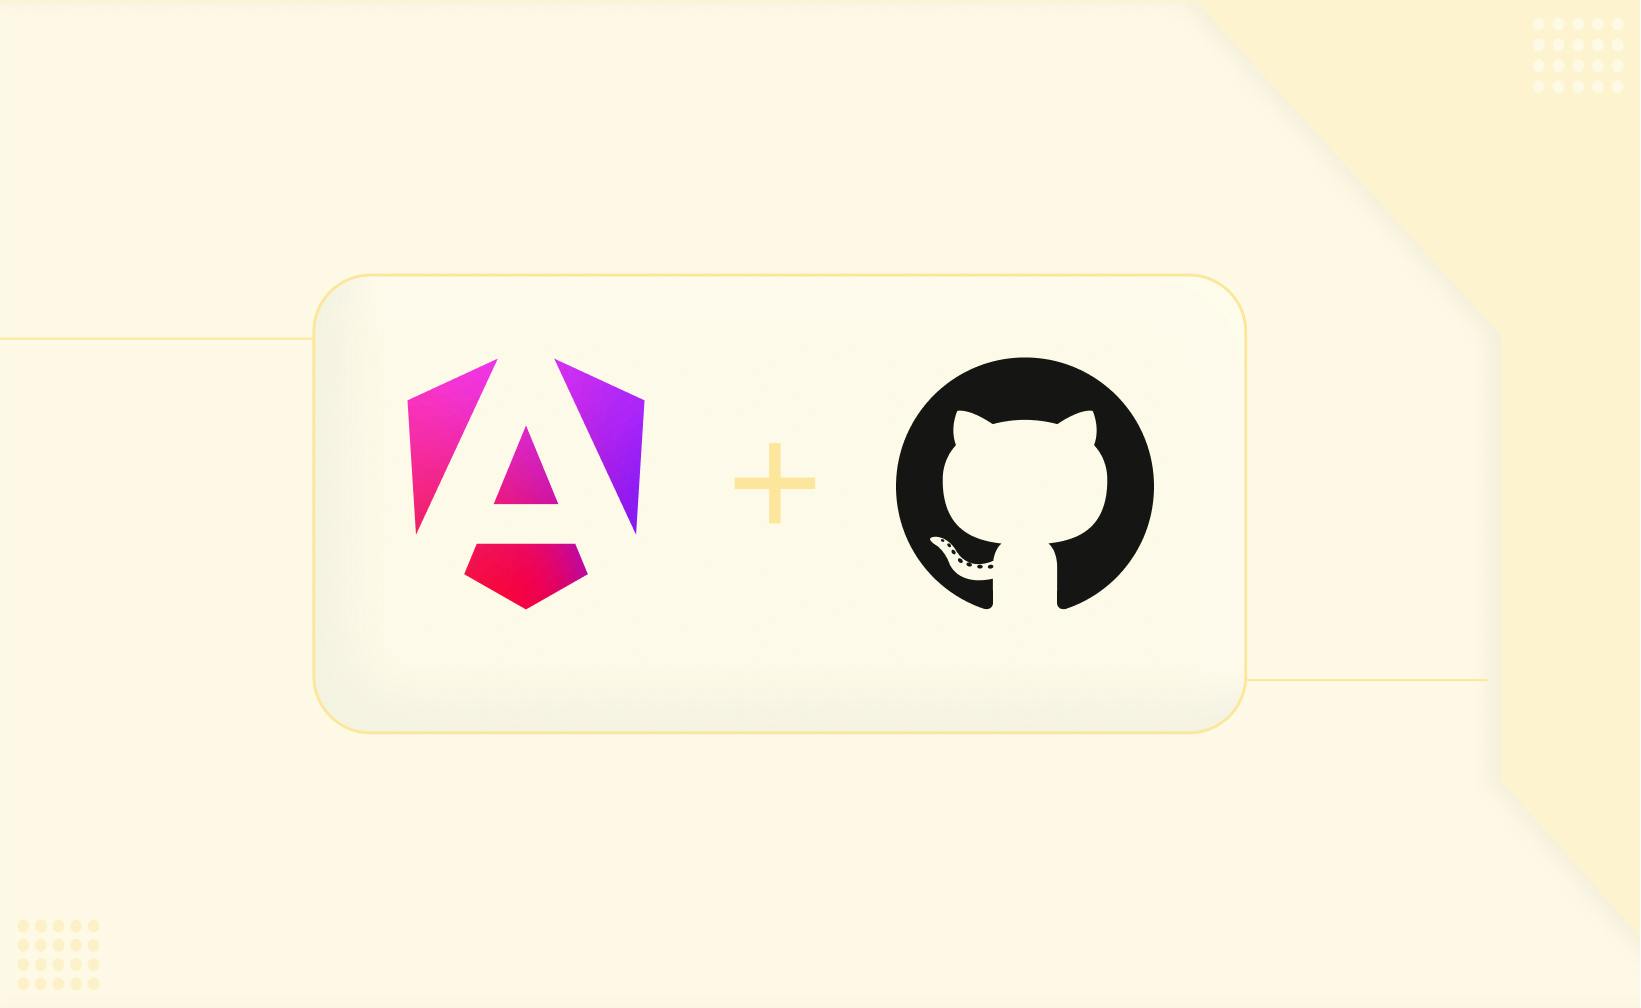 Steps to Host an Angular App in GitHub Pages